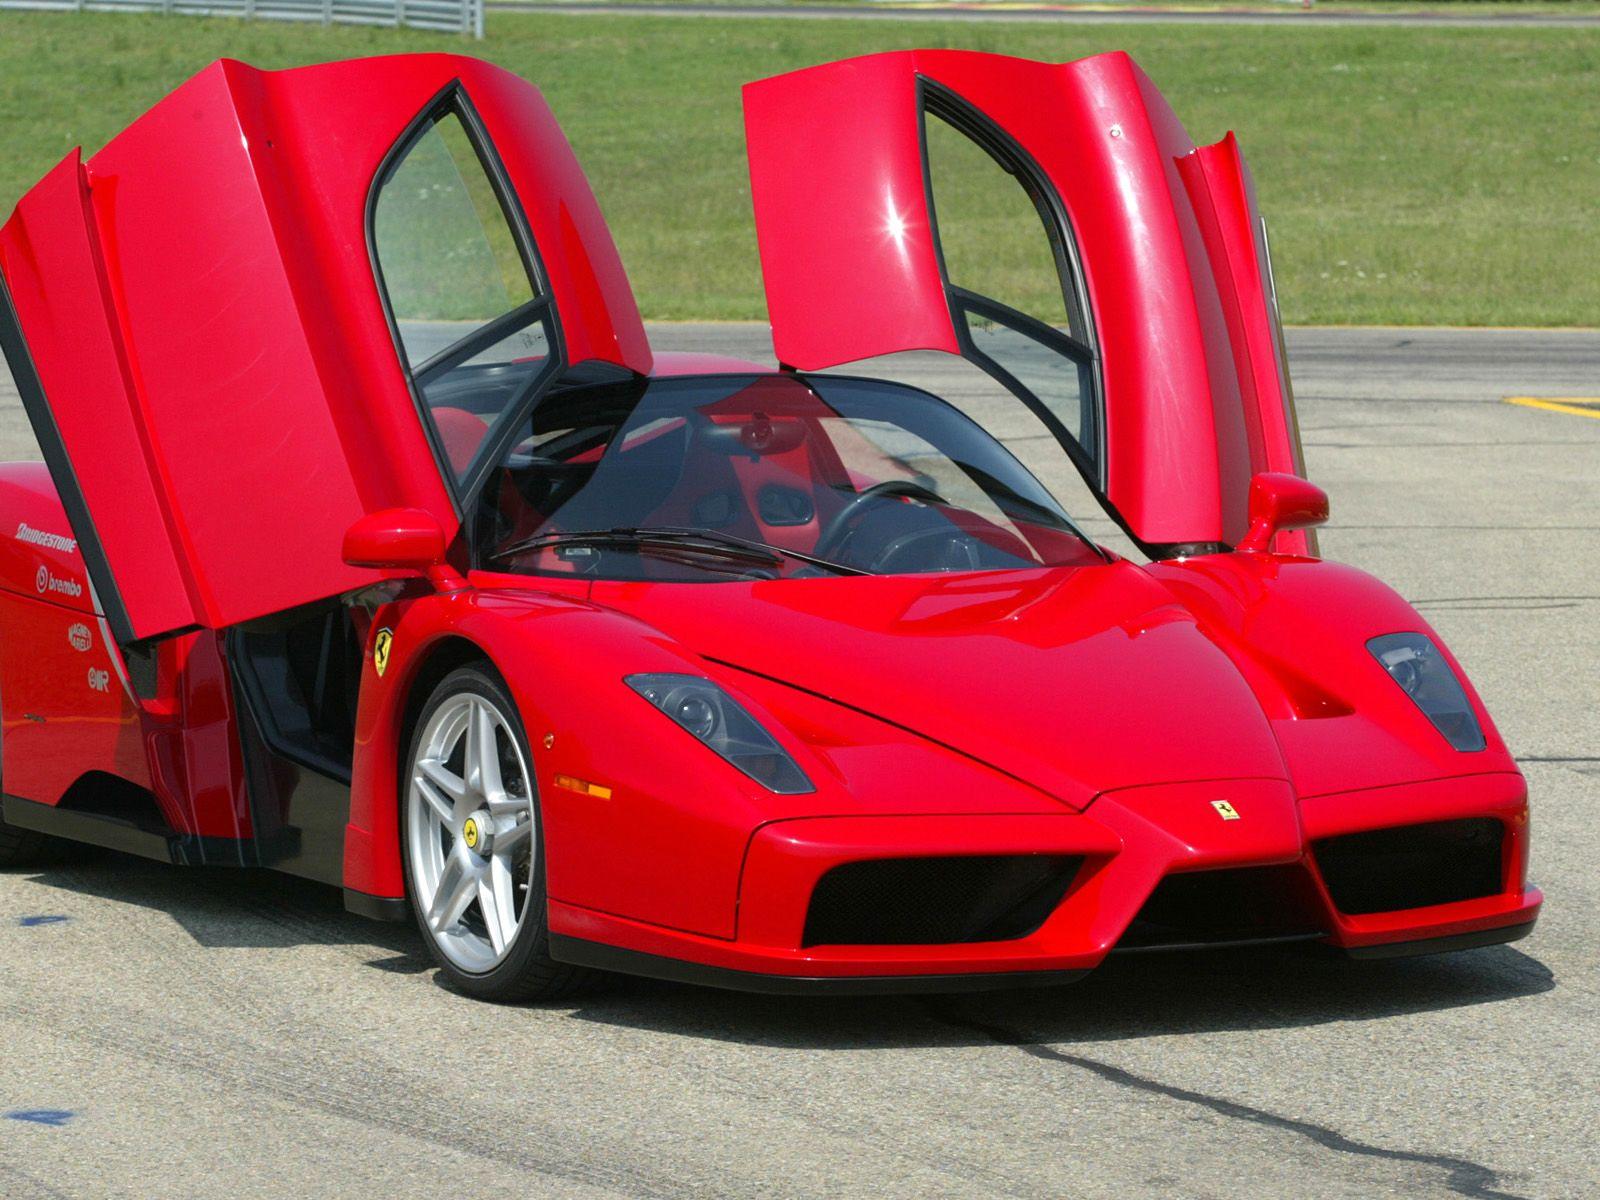 Download Ferrari for laptop - Cars wallpapers for your mobile cell phone